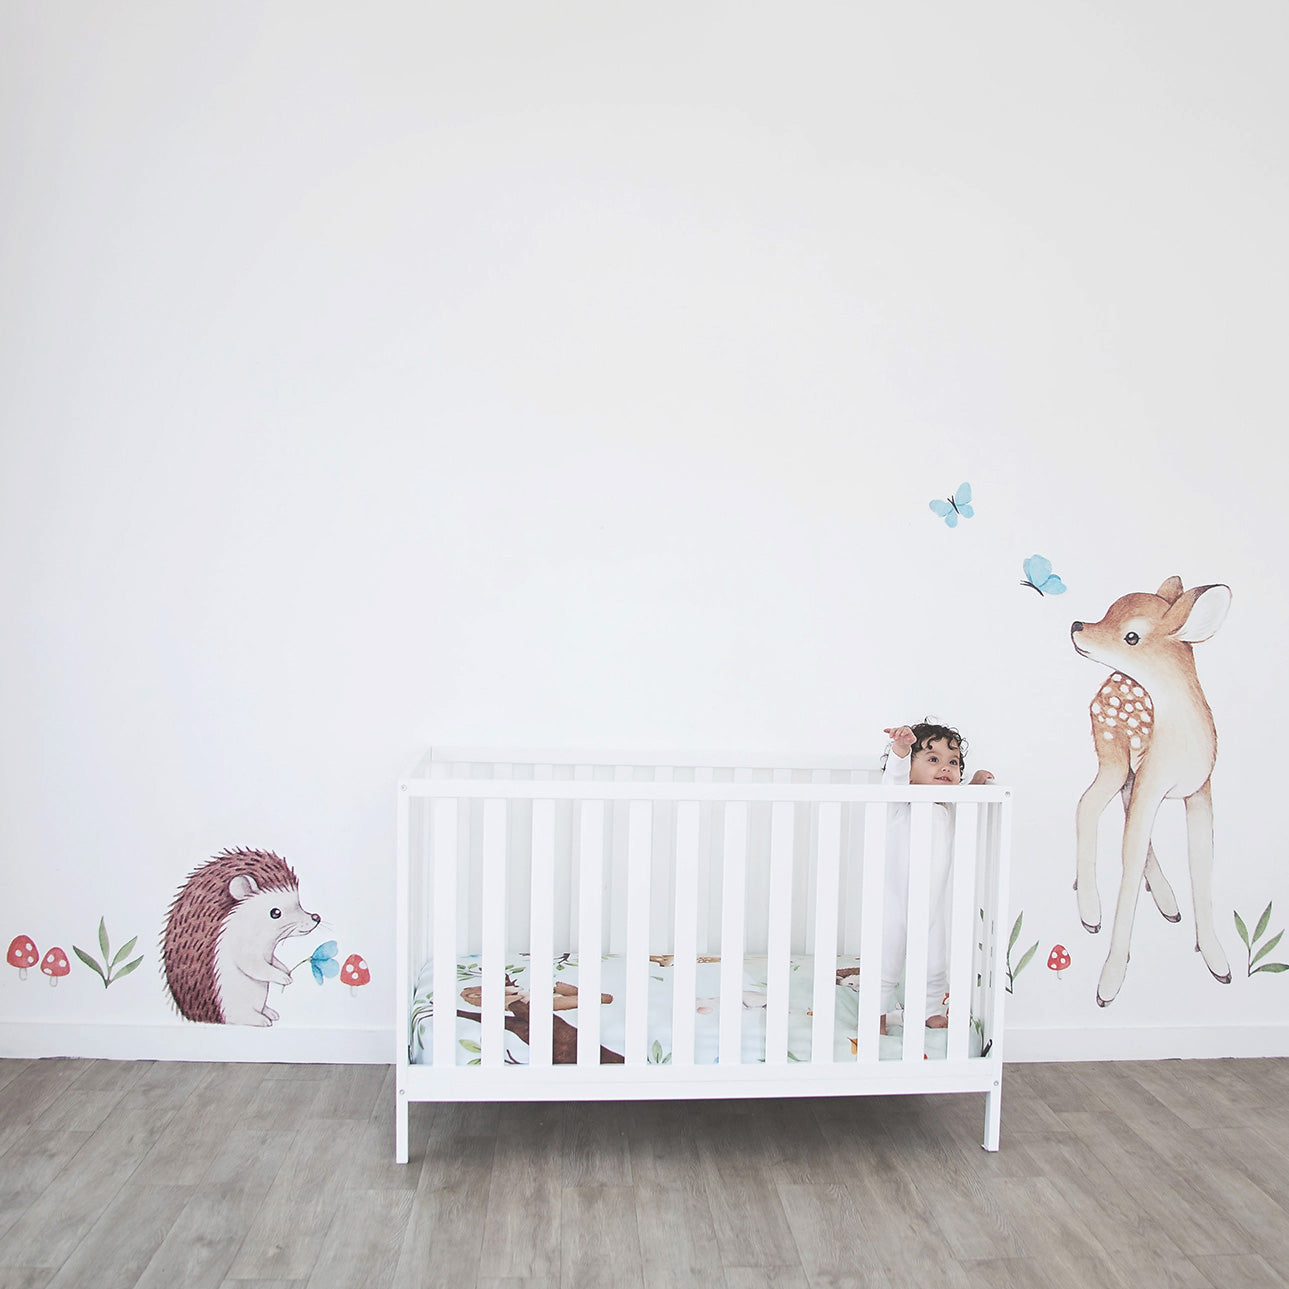 Enchanted Forest nursery wall decal by Rookie Humans